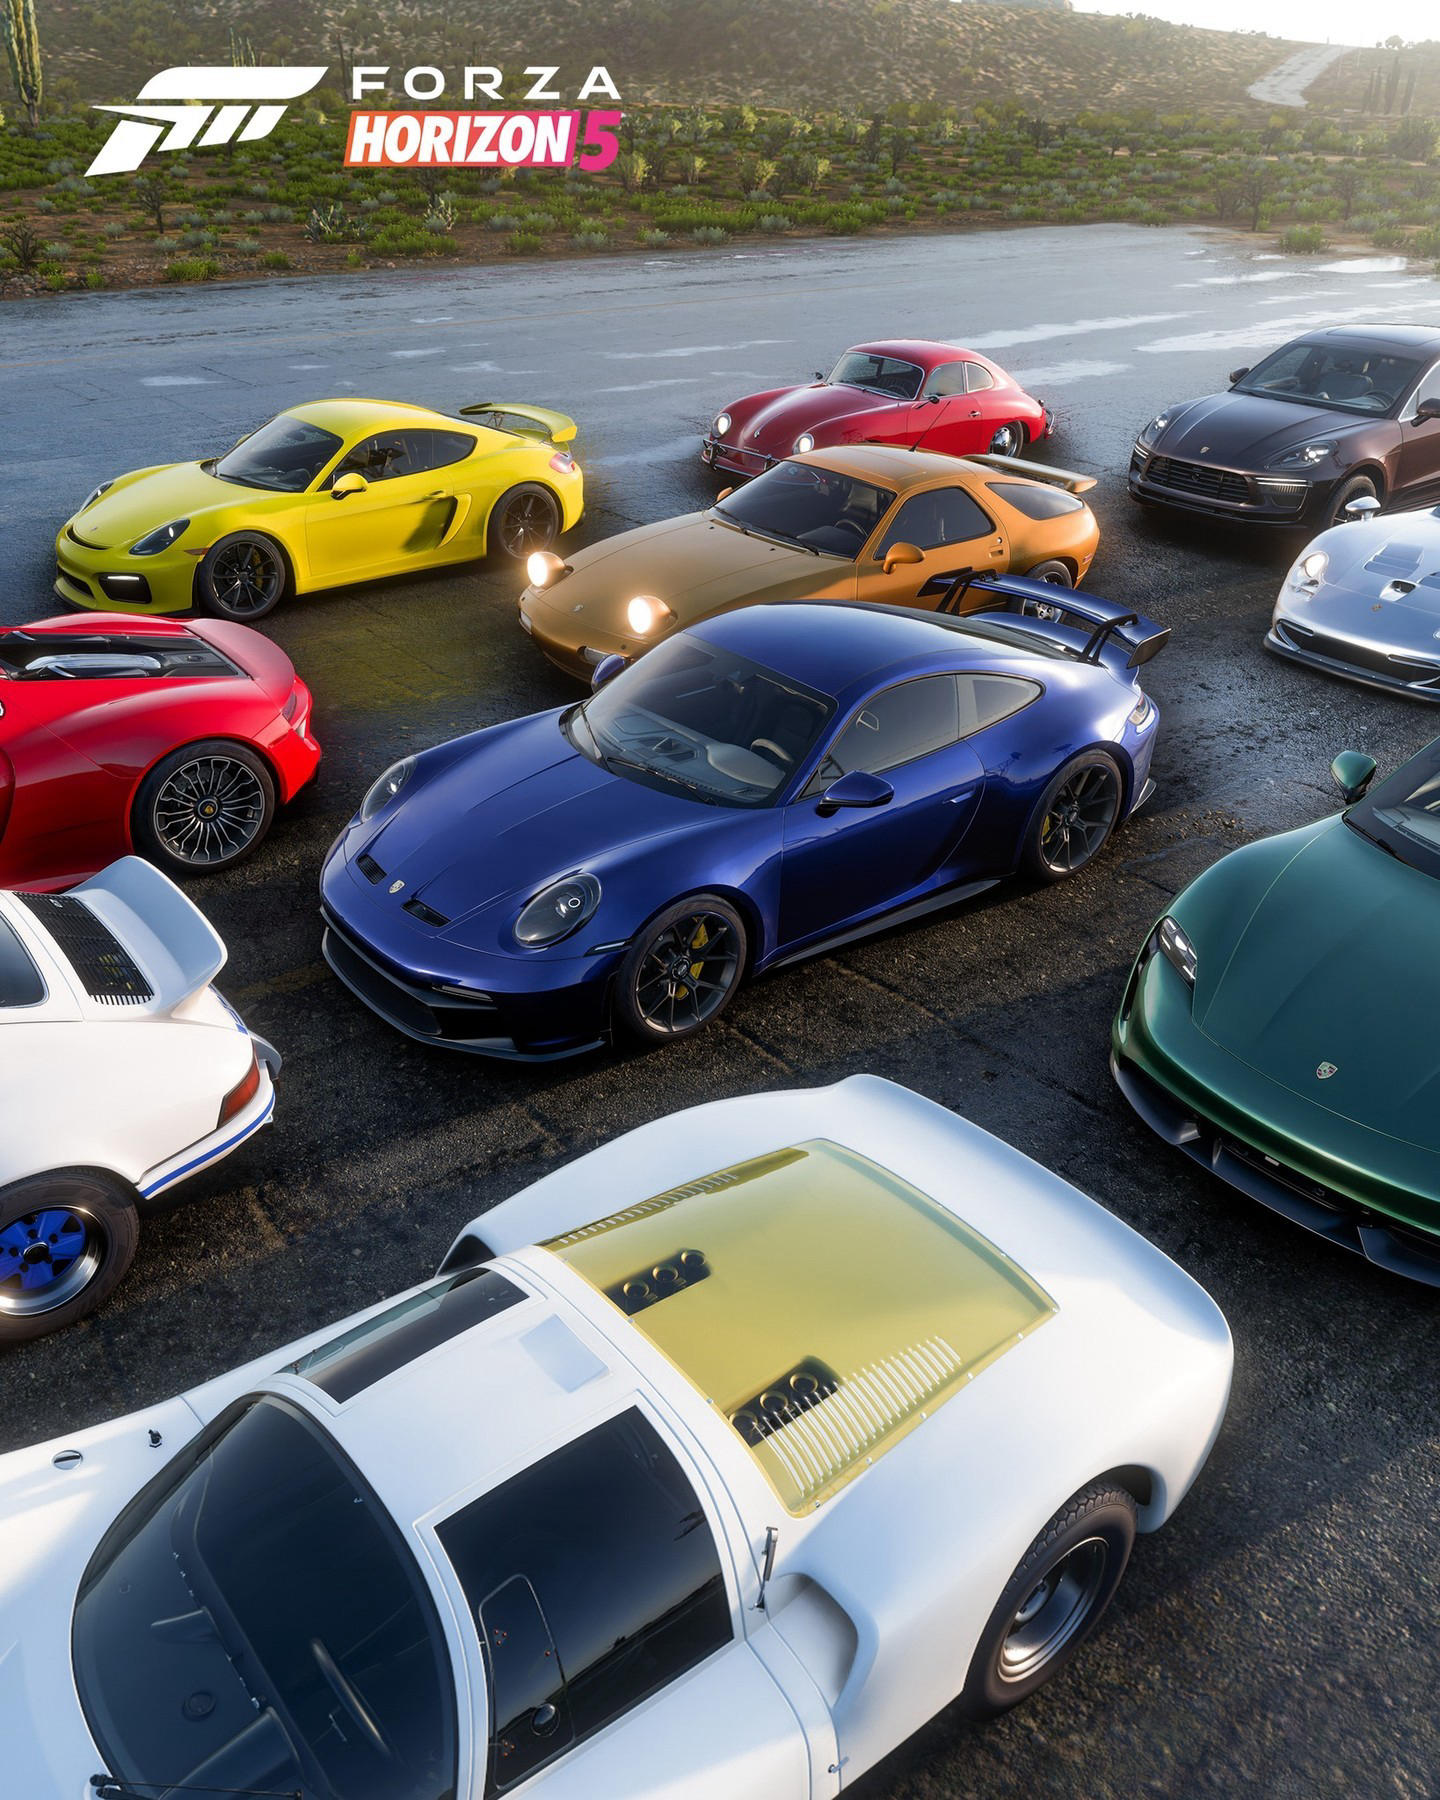 Porsche - Set in the luscious landscapes of Mexico, the latest #forzahorizonofficial is packed full